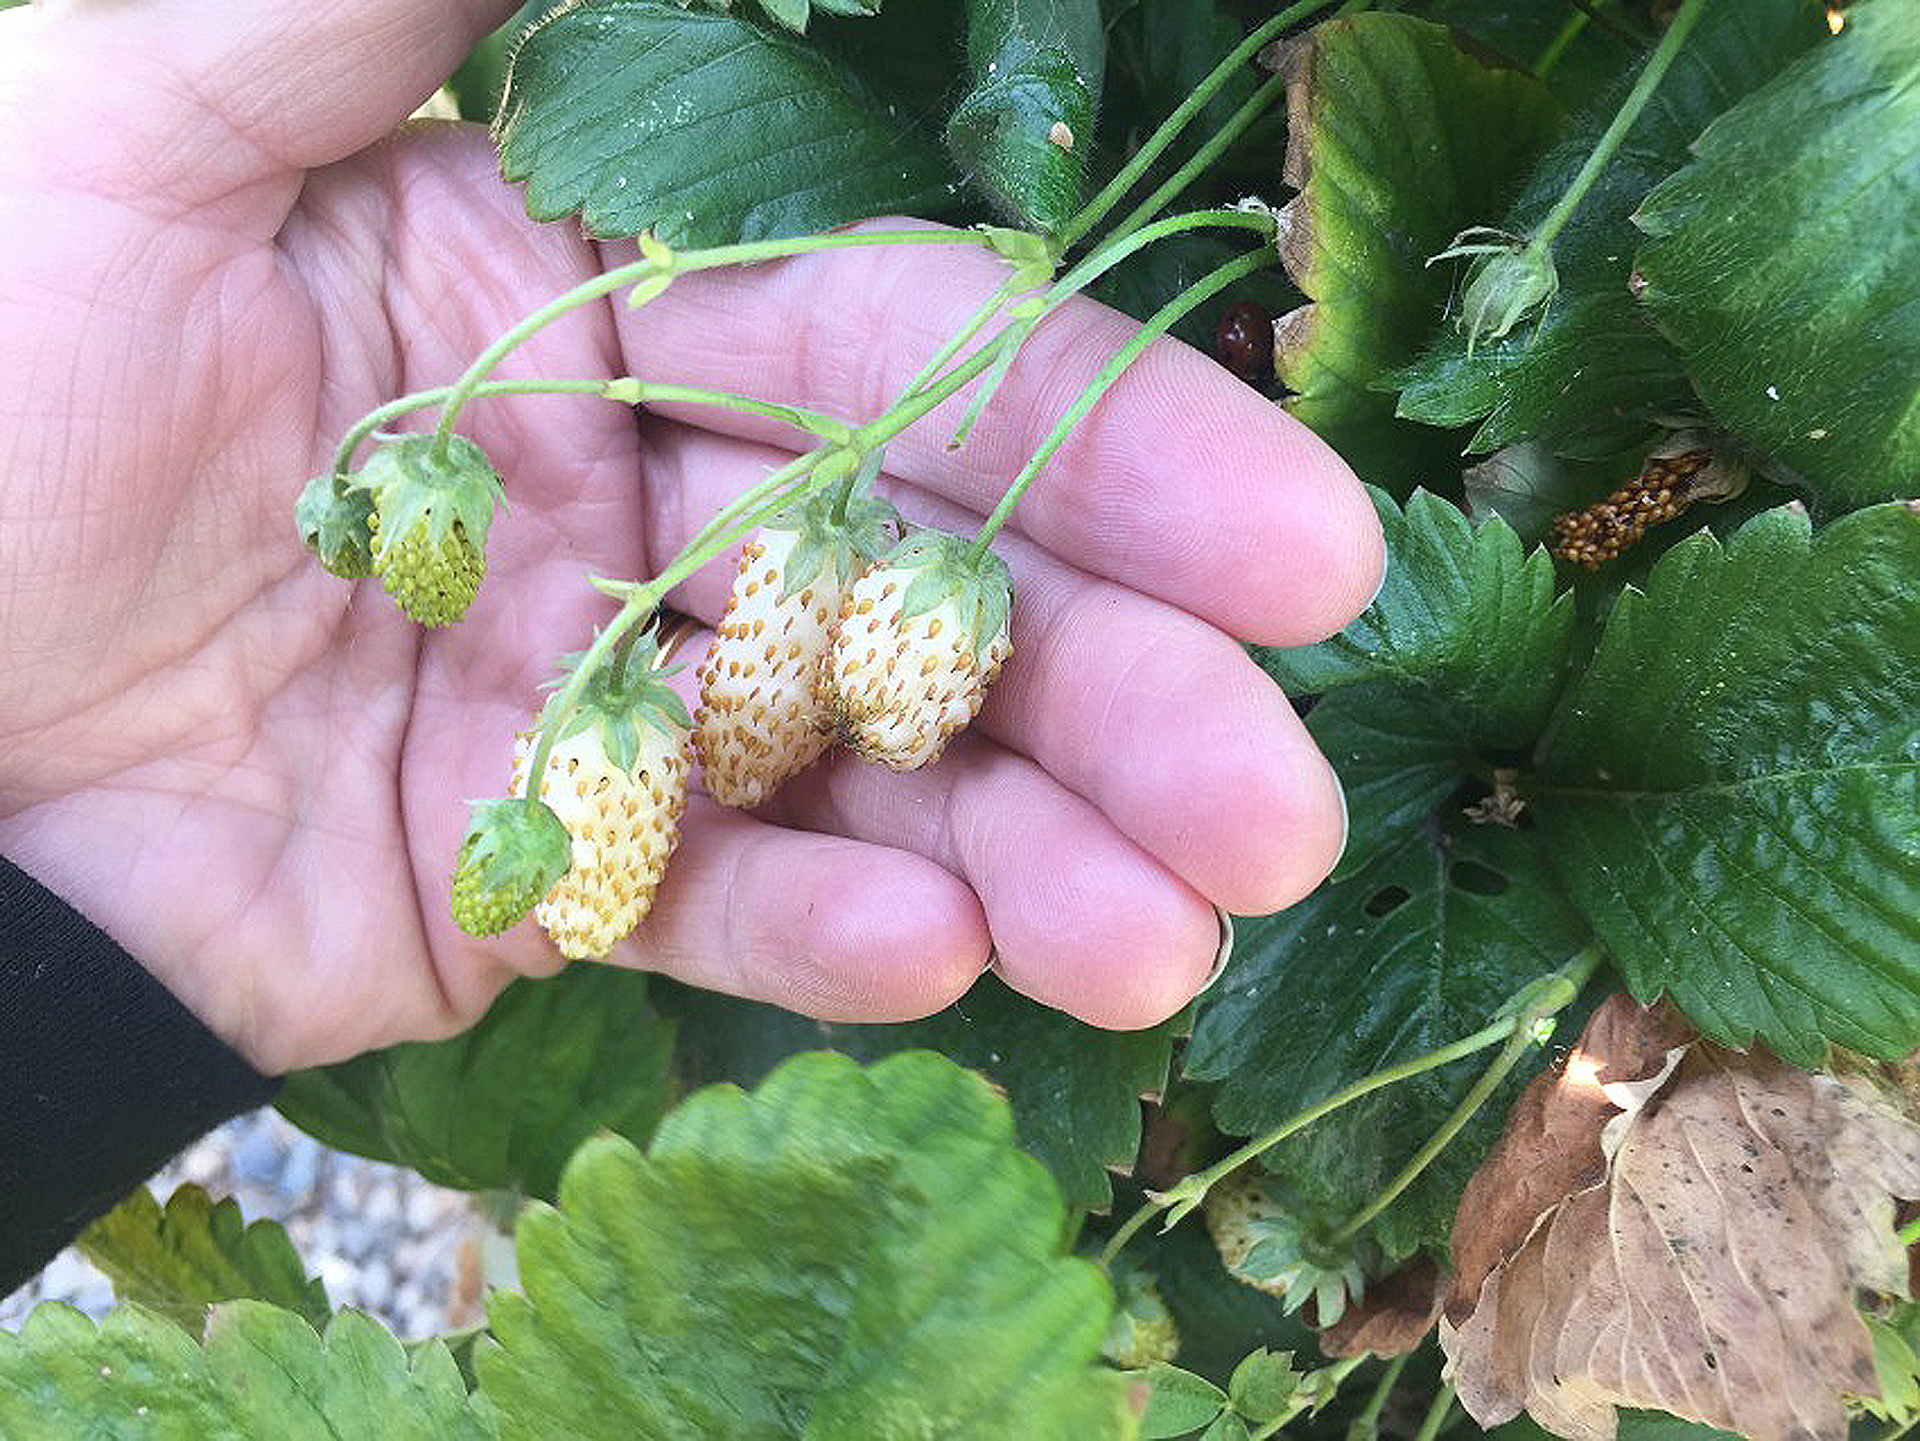 Pinky-sized white and pale yellow fraises des bois could be the most delicious strawberries grown but are exceedingly difficult to find for sale so some berry lovers plant them in their yards.